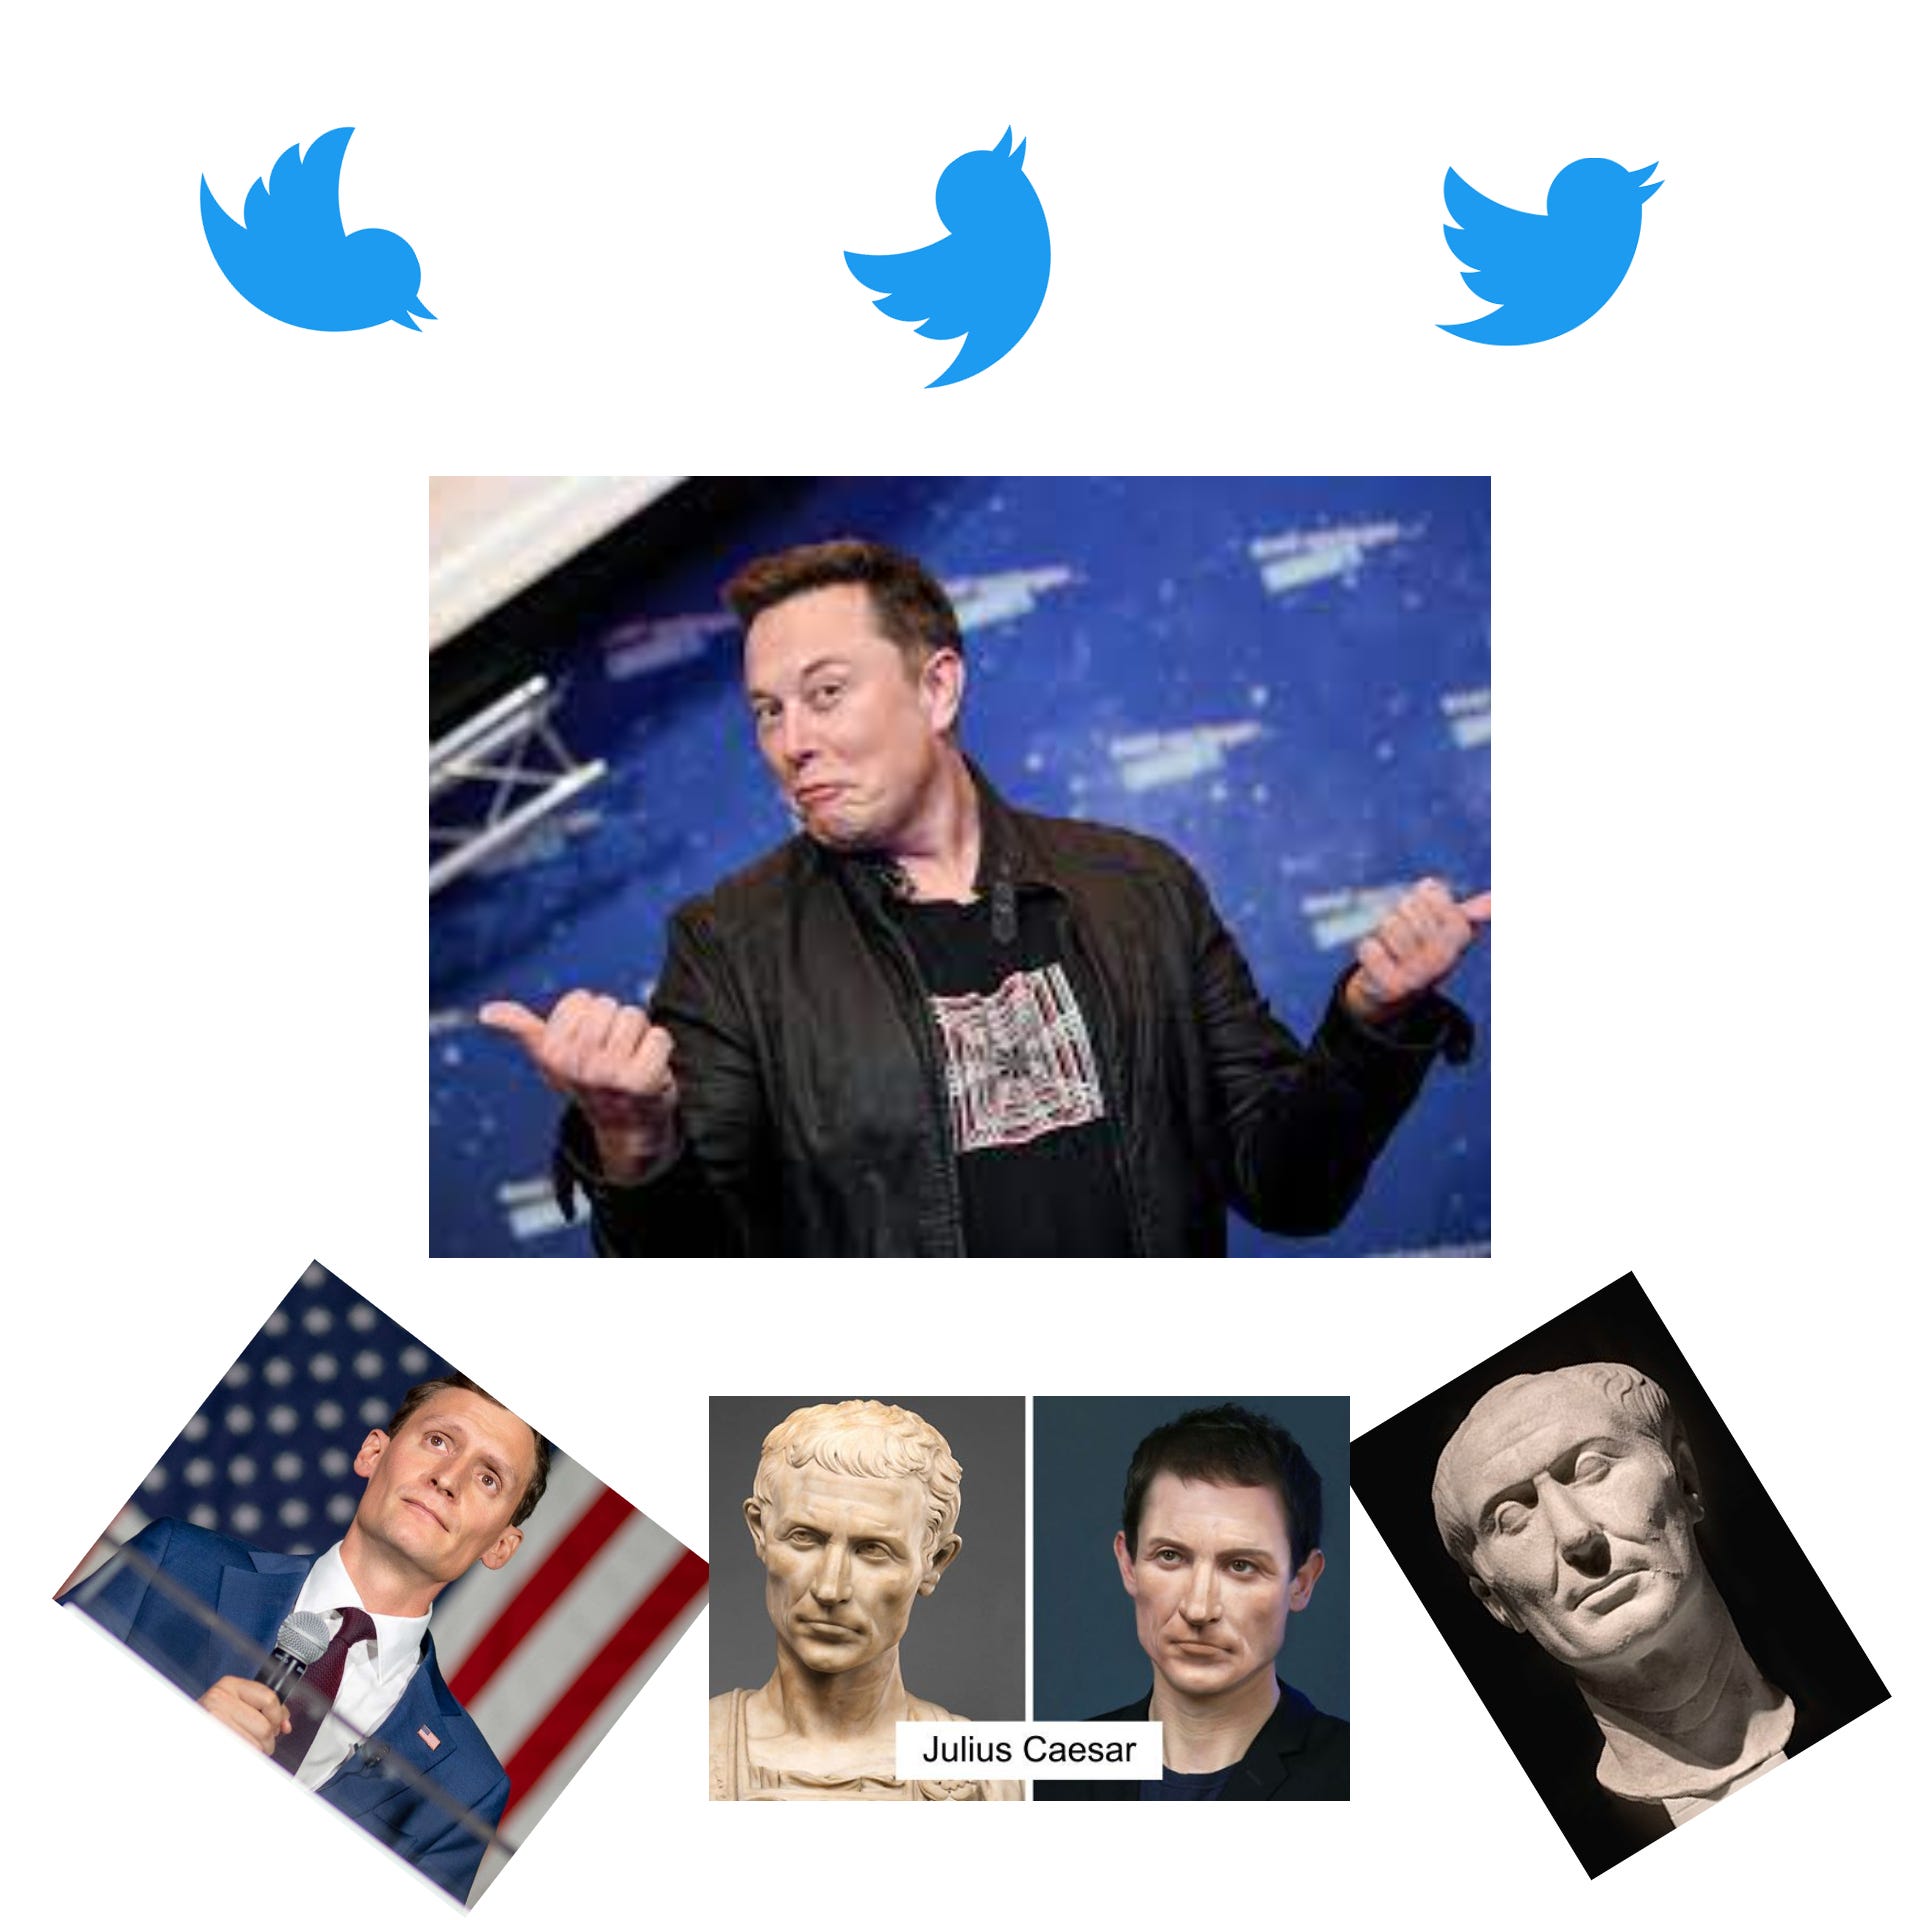 16a. Musk and Twitter Ads